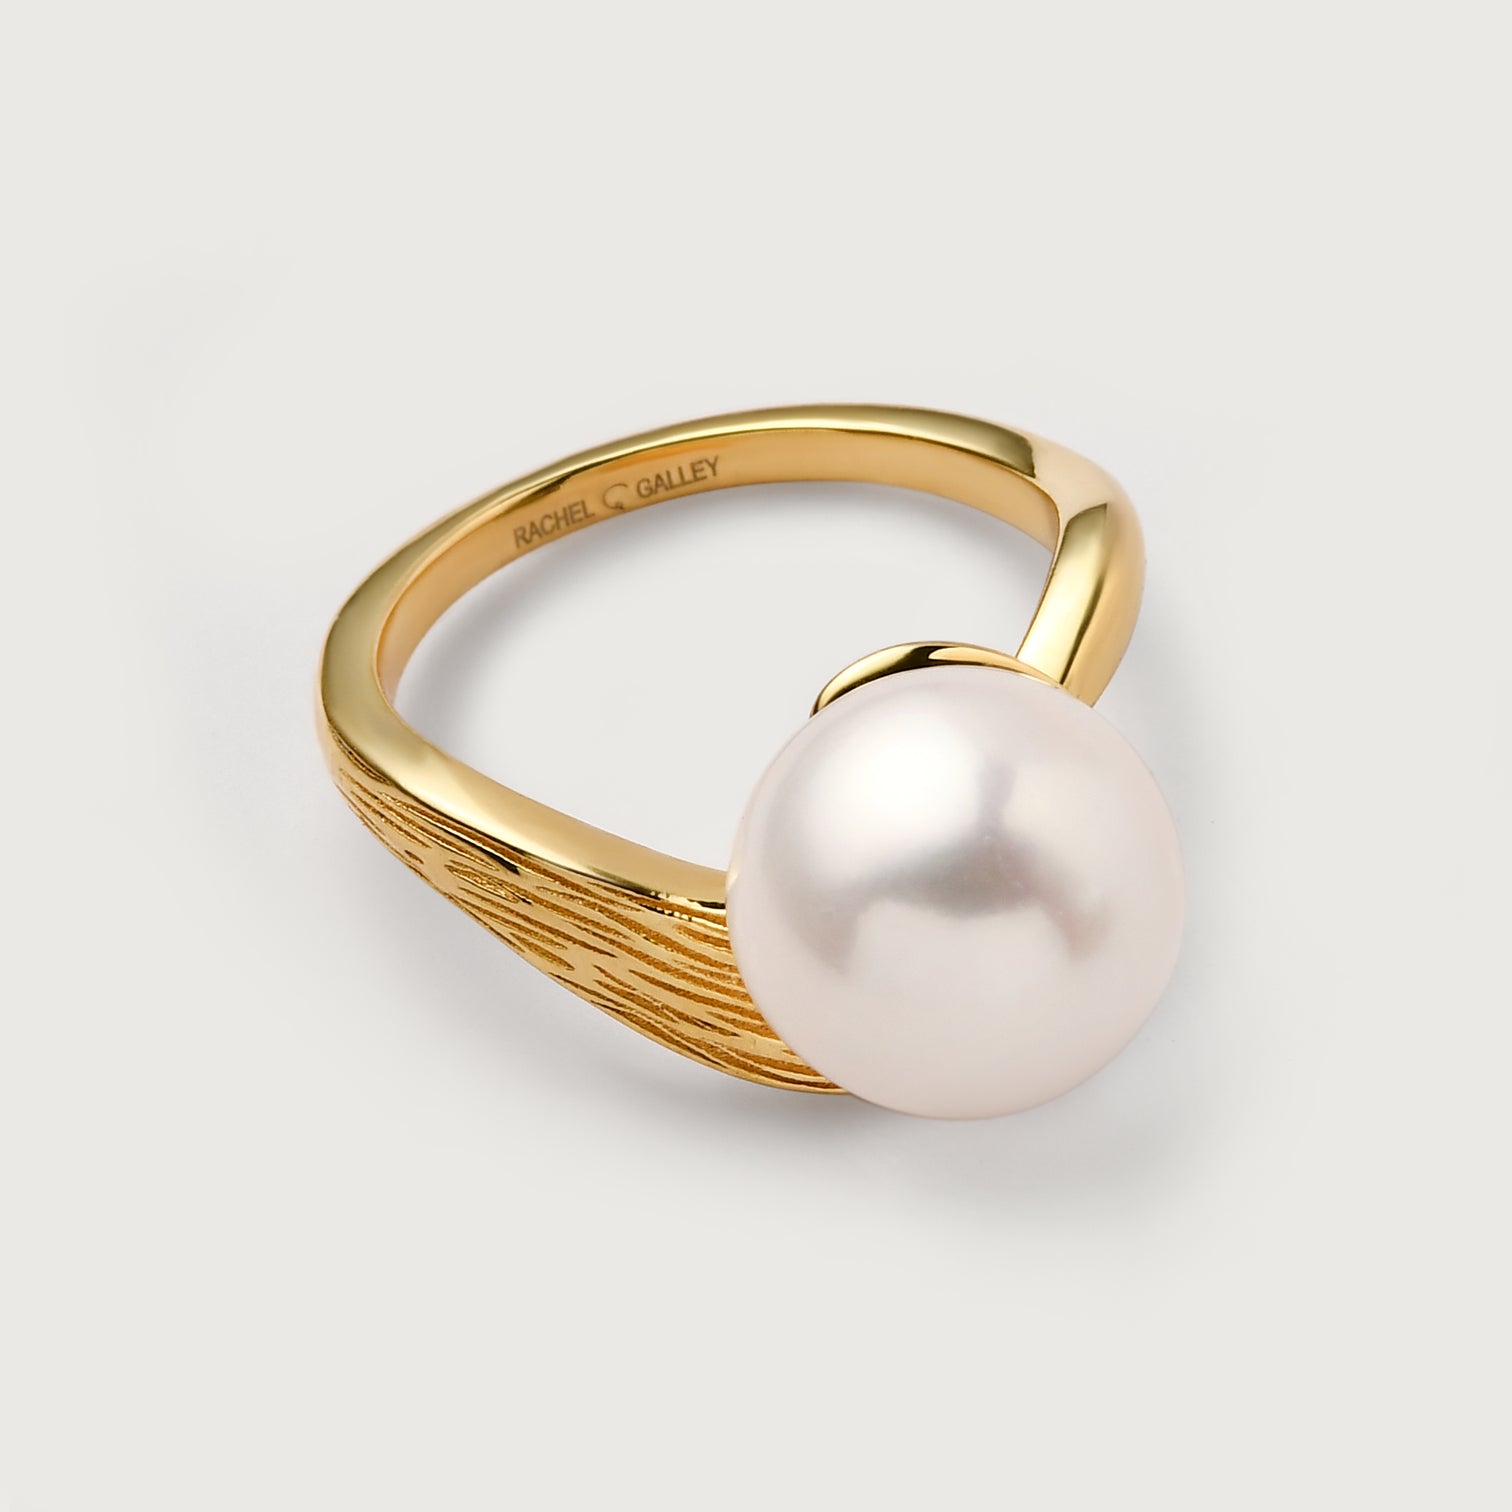 Ocean Wave Ring with White Freshwater Pearl – RachelGalley